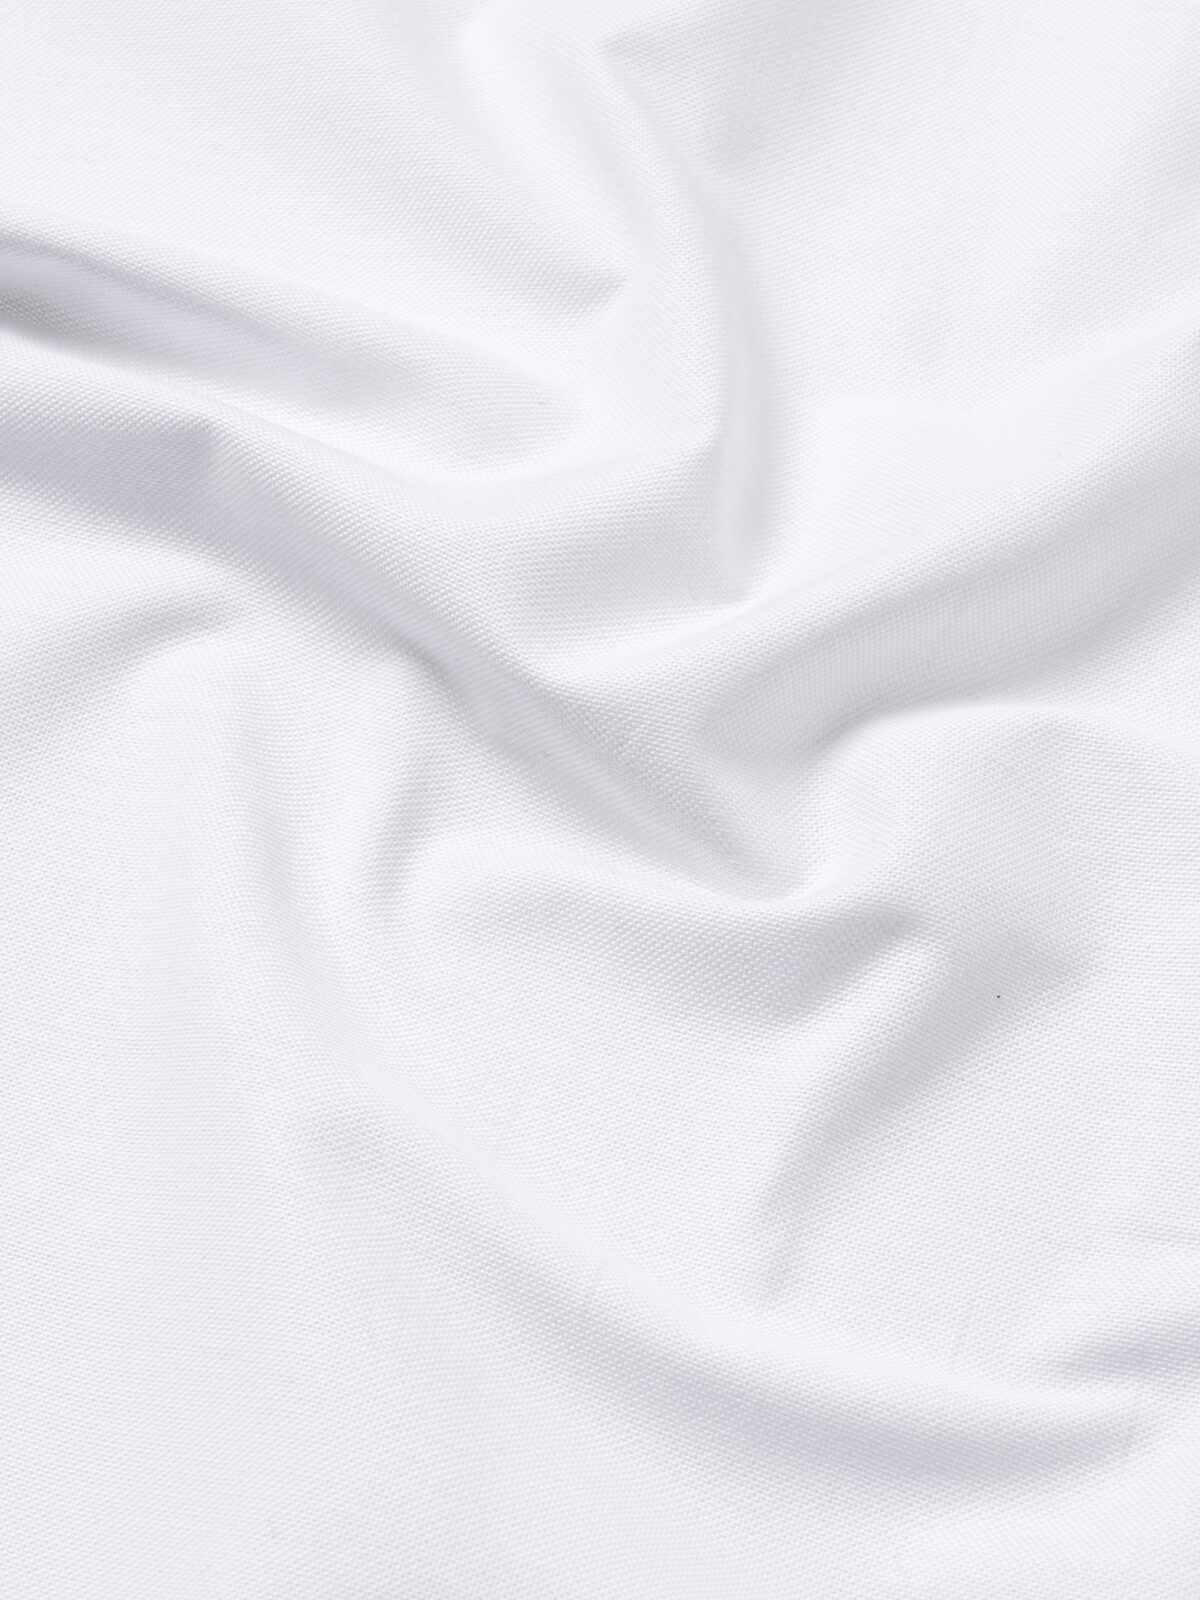 Washed White Lightweight Oxford Shirts by Proper Cloth